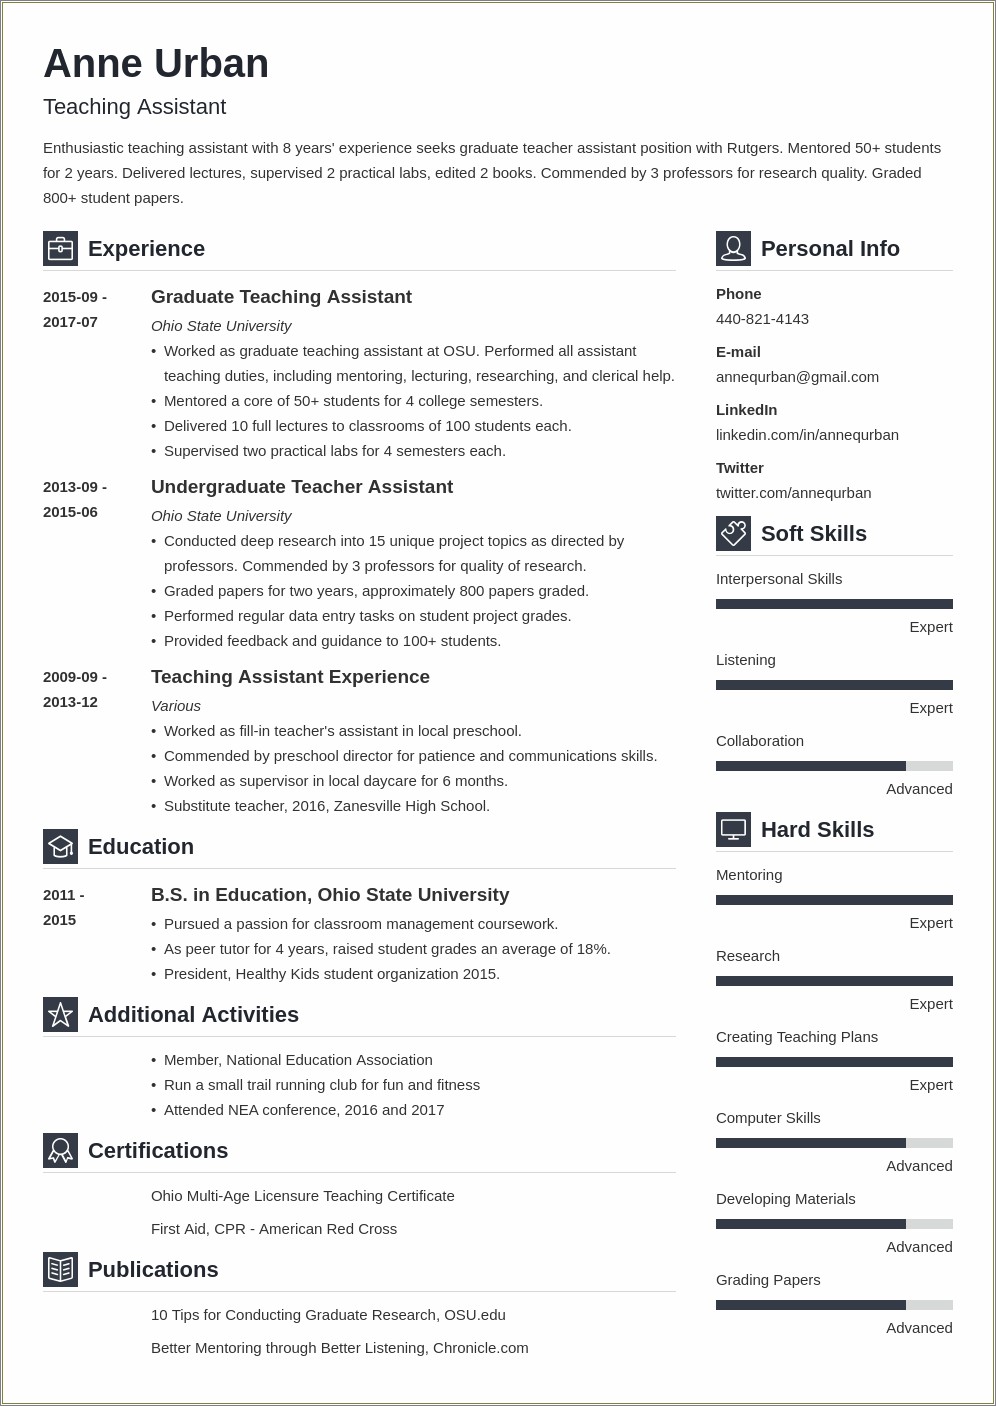 Good Fonts For An Engineering Resume